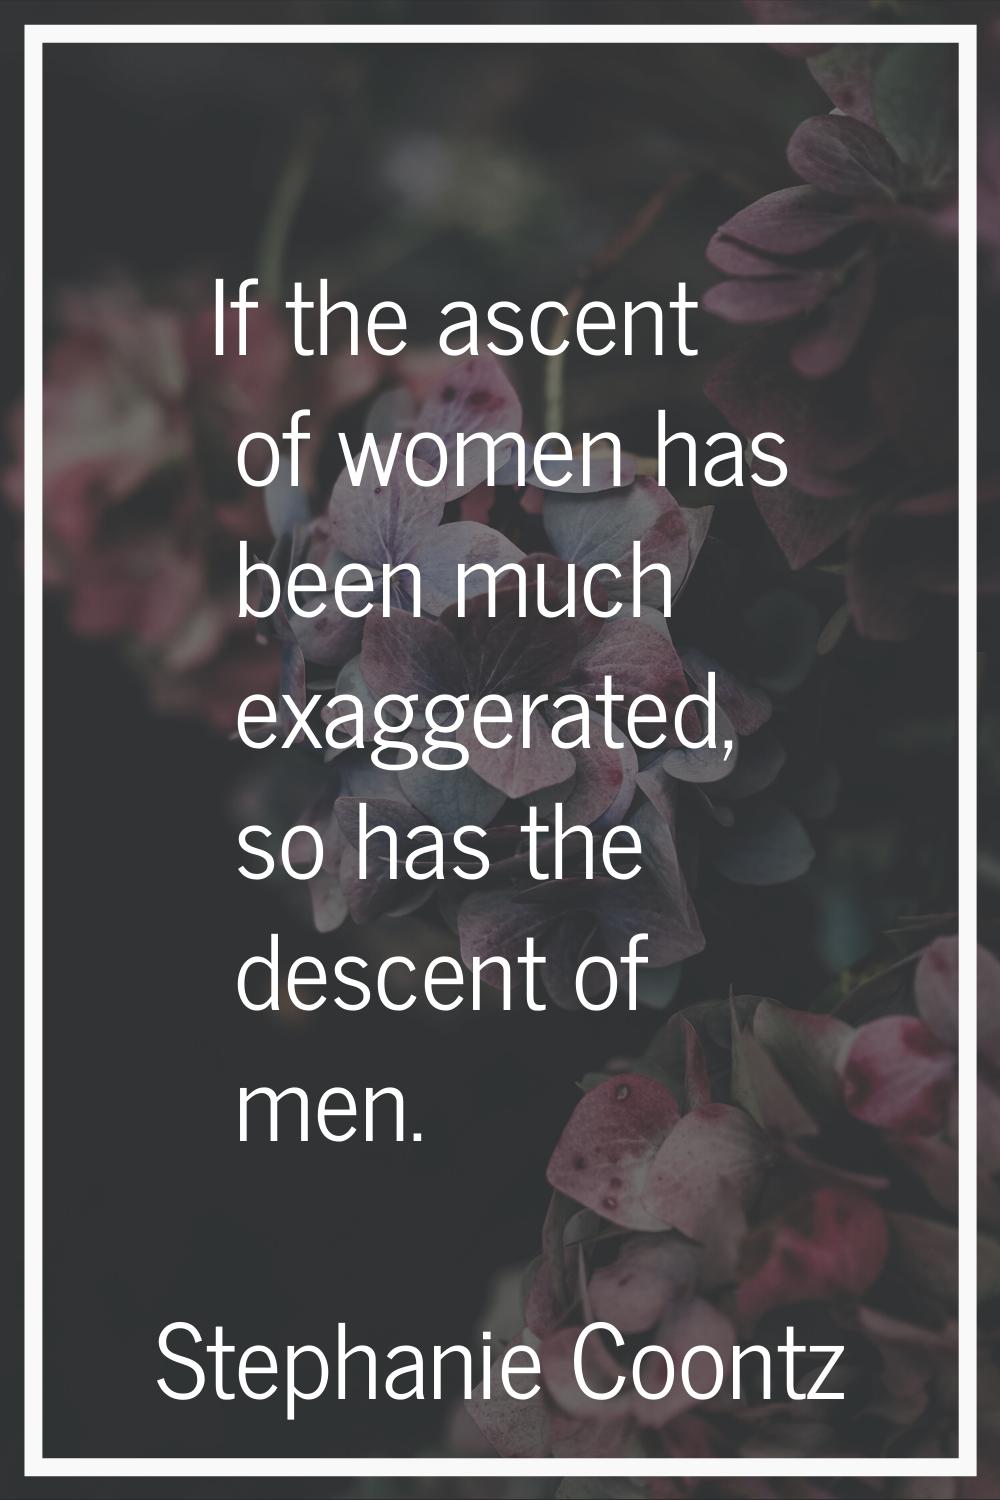 If the ascent of women has been much exaggerated, so has the descent of men.